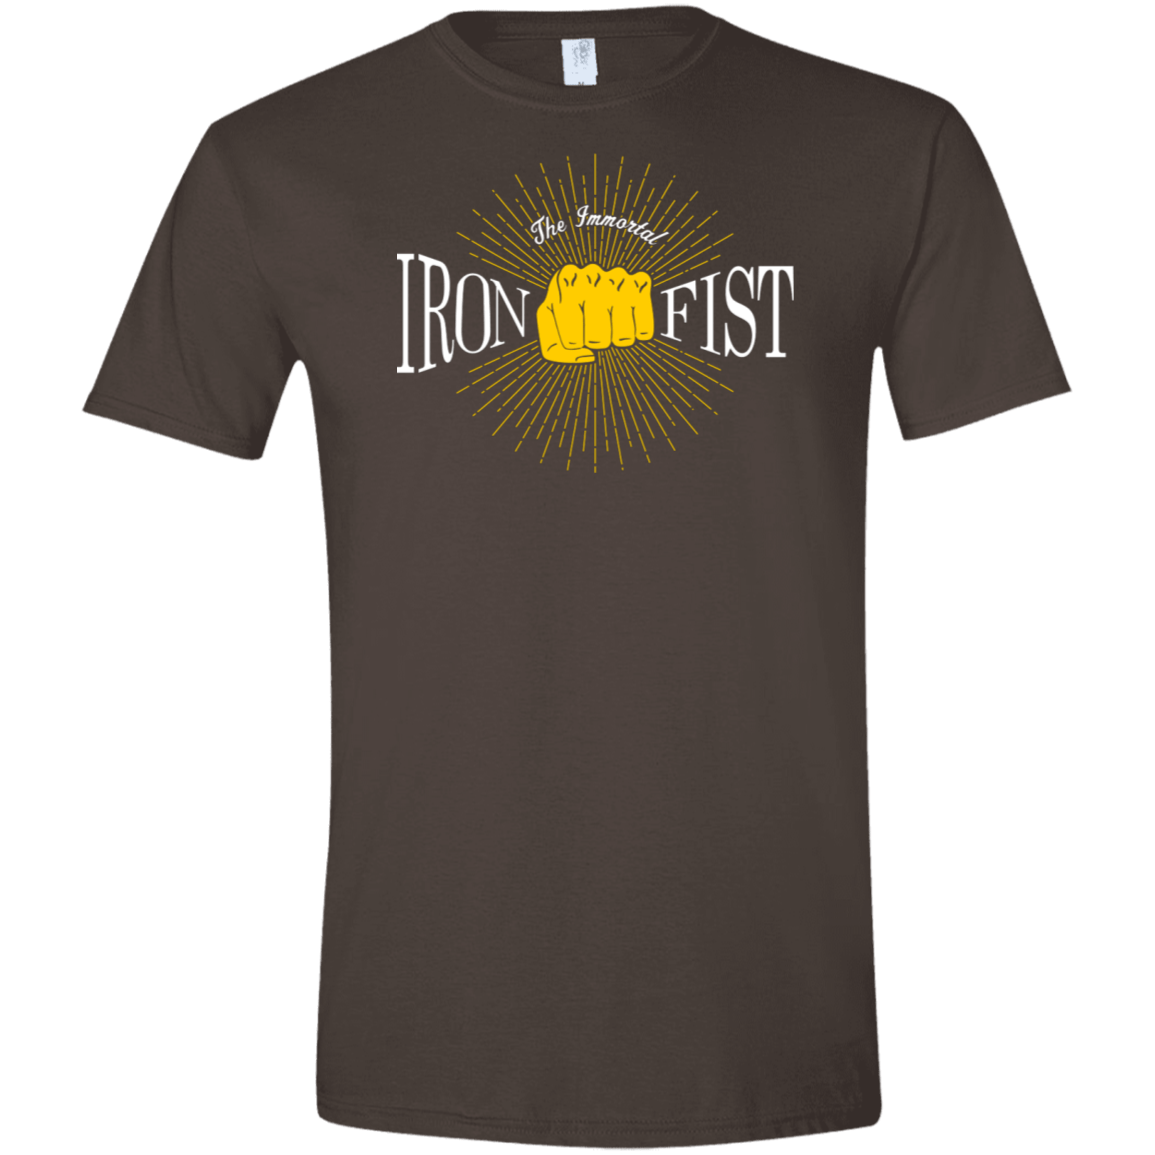 T-Shirts Dark Chocolate / S Vintage Immortal Iron Fist Men's Semi-Fitted Softstyle